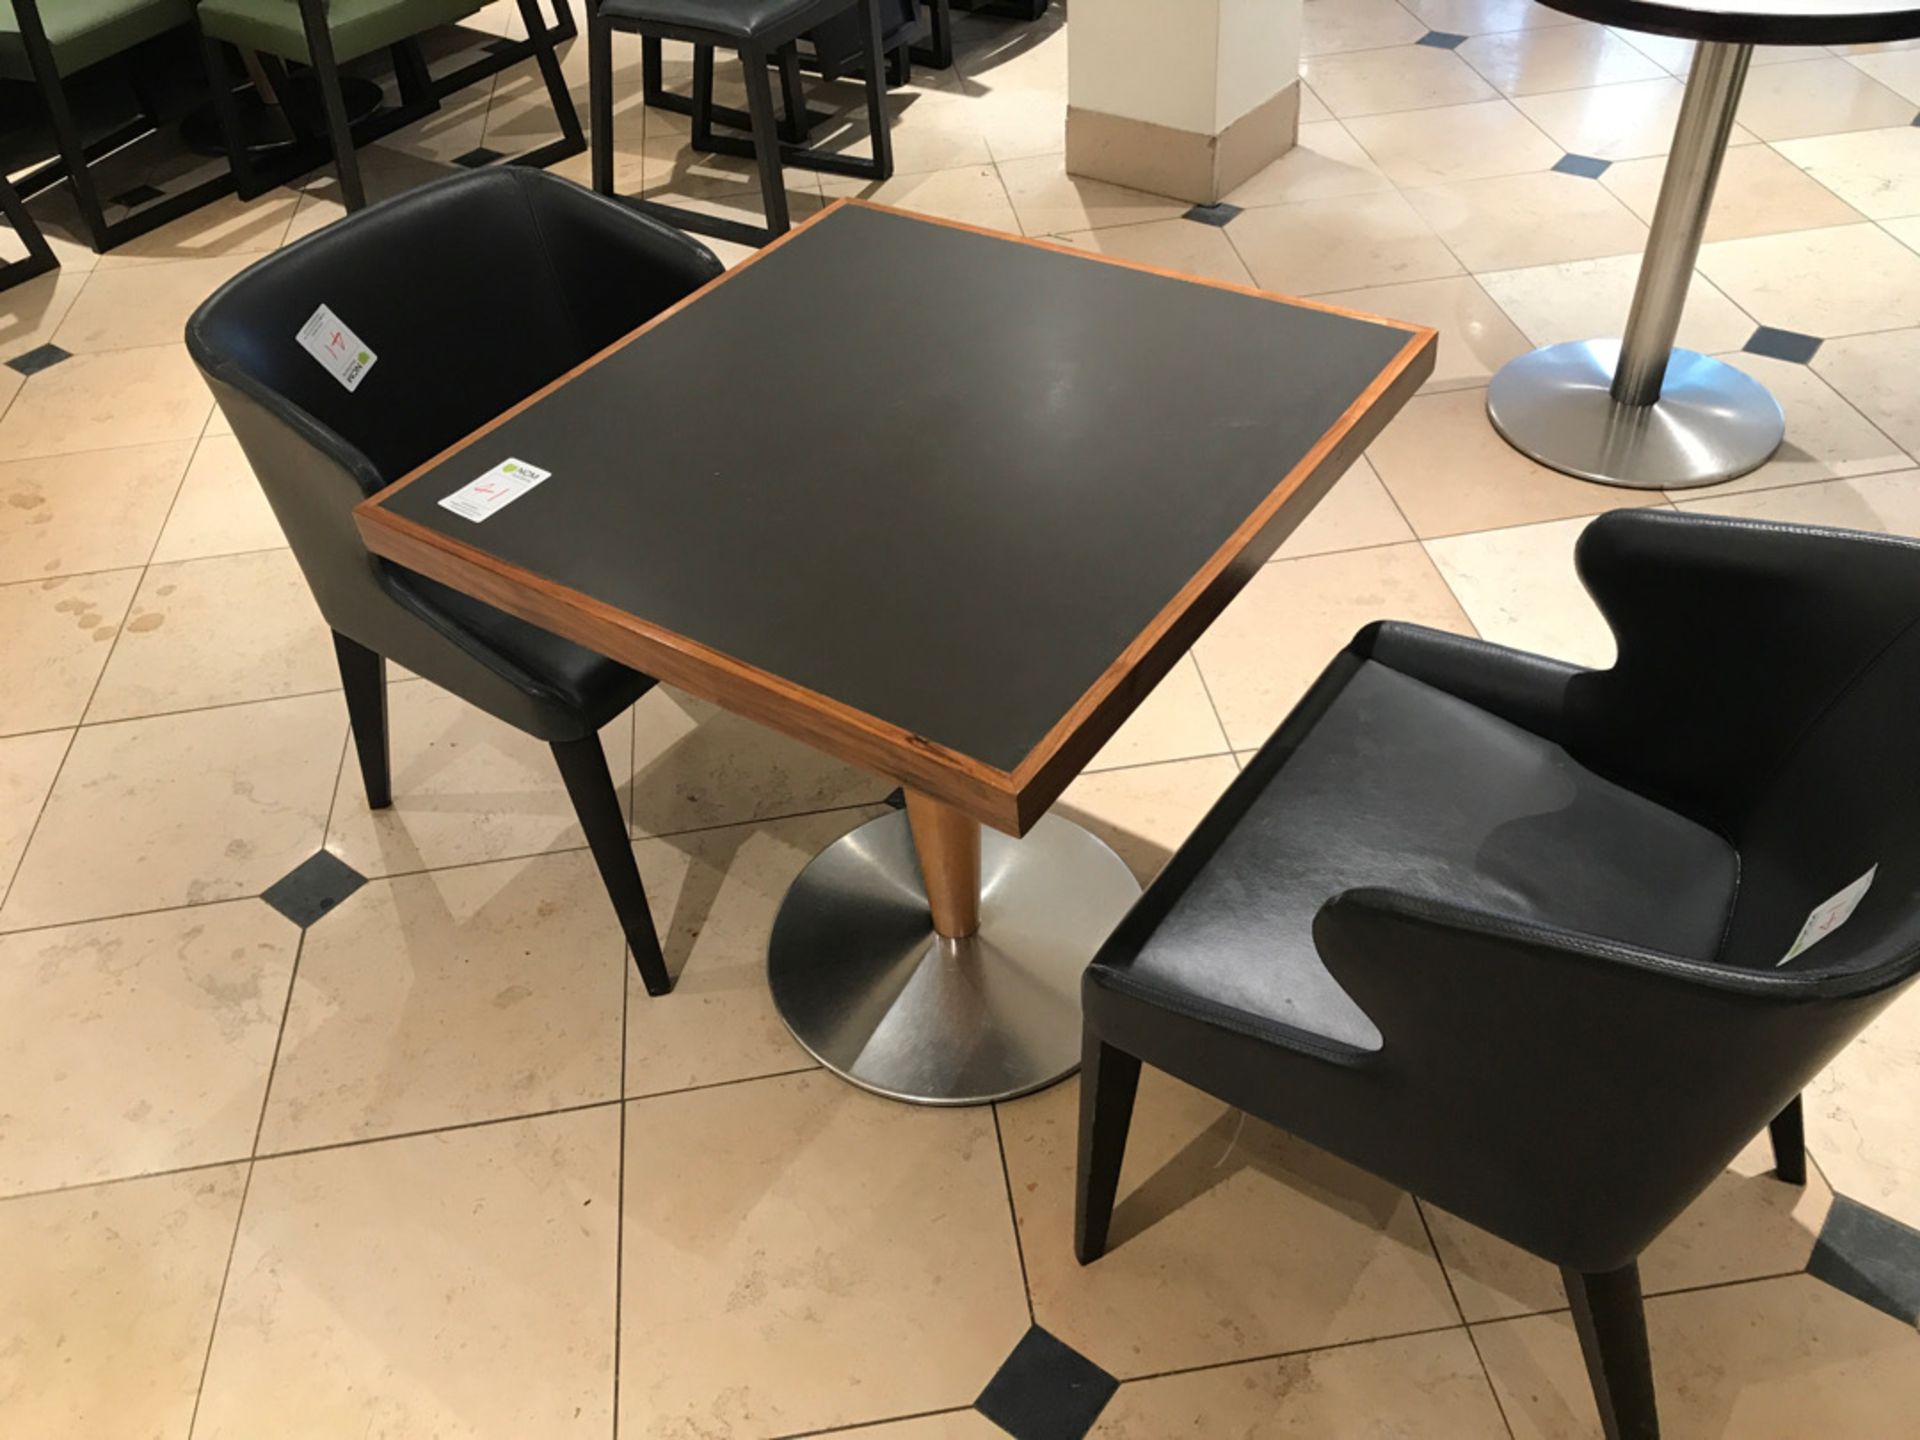 Modern square pedestal table with two chairs